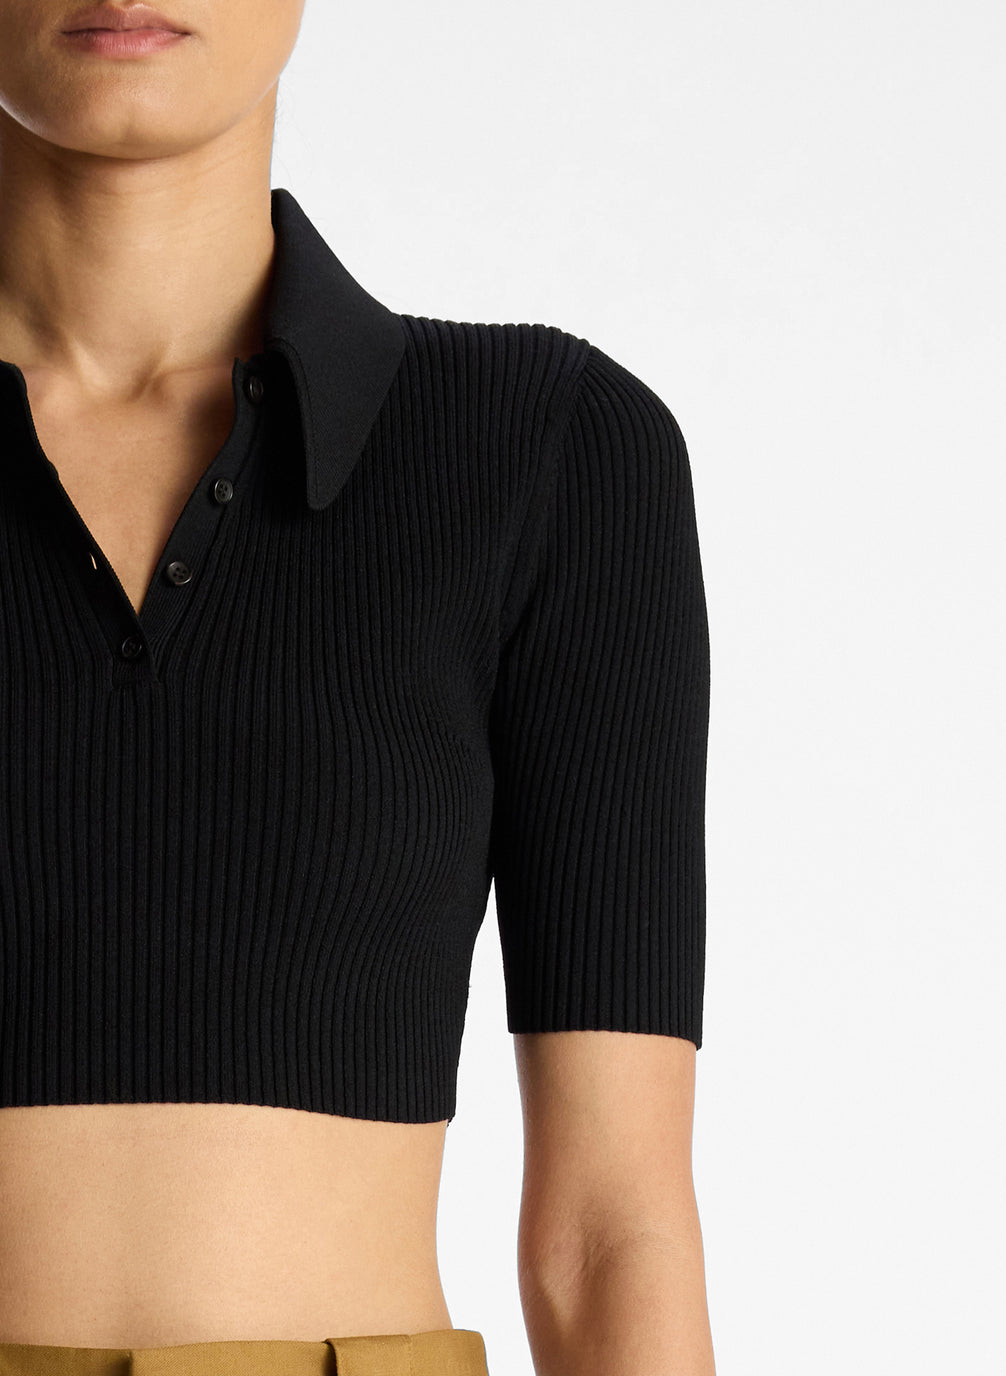 The ALC Cropped Atlas Top in black available at The New Trend Australia